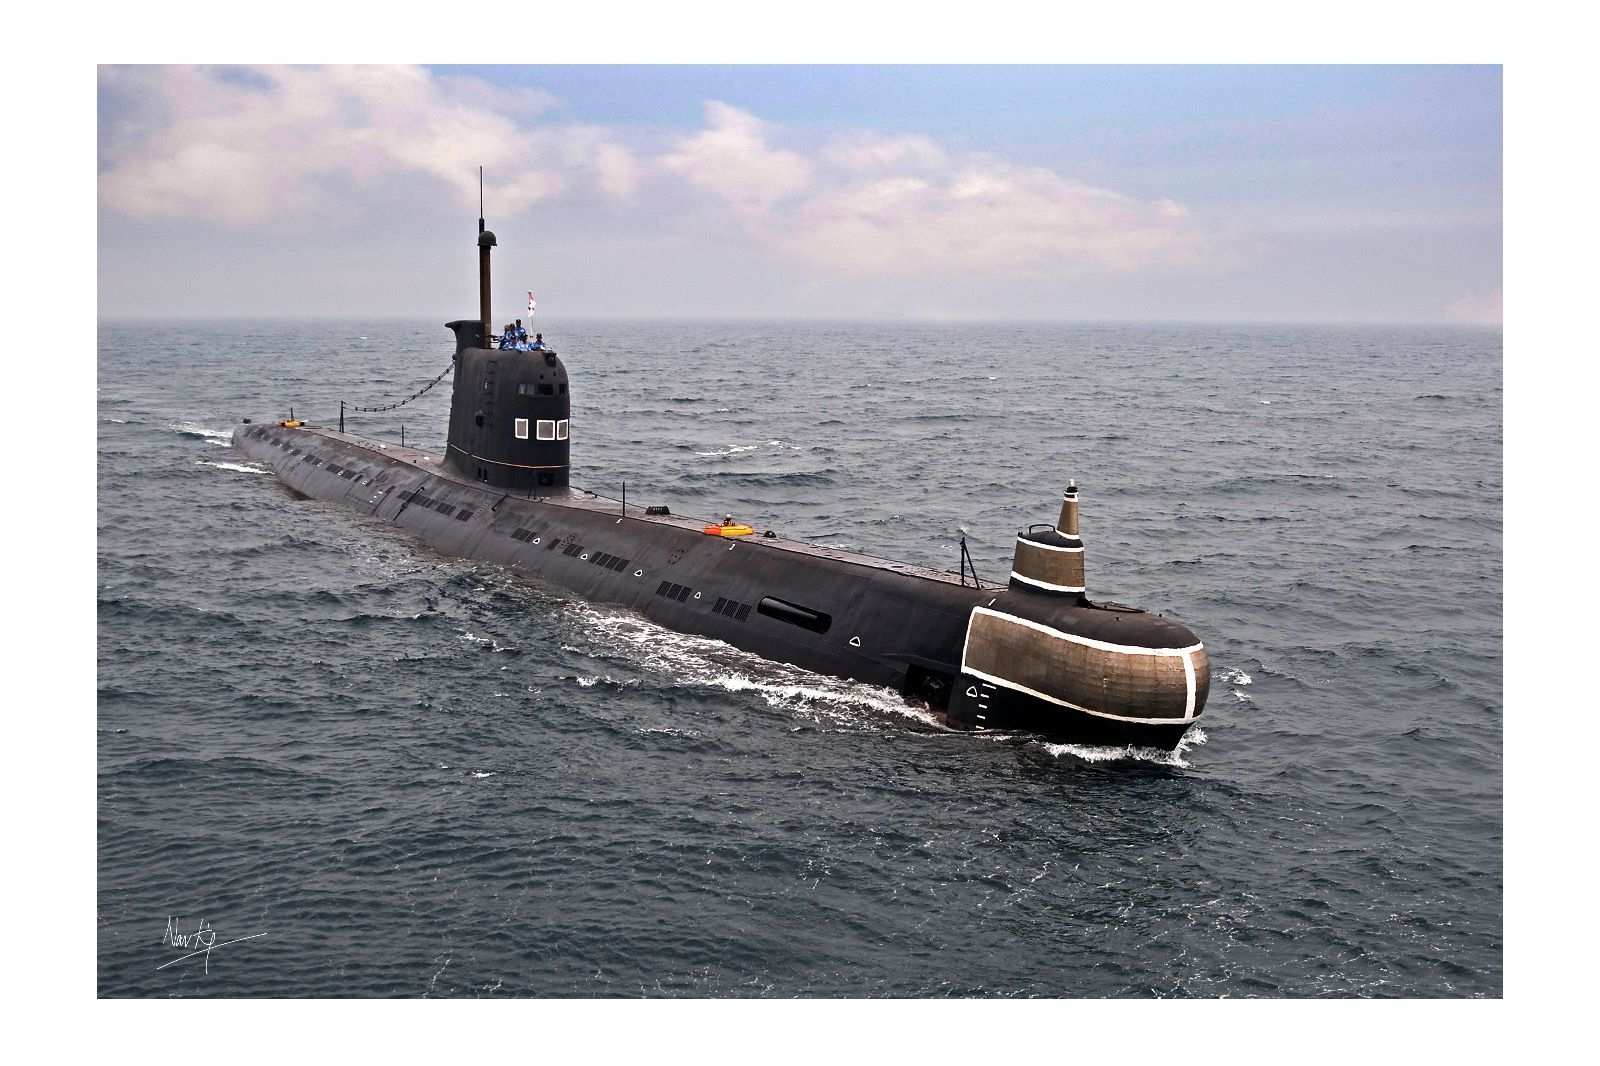 The last Foxtrot-class submarine in the Indian Navy, INS Vagli, was decommissioned in 2001